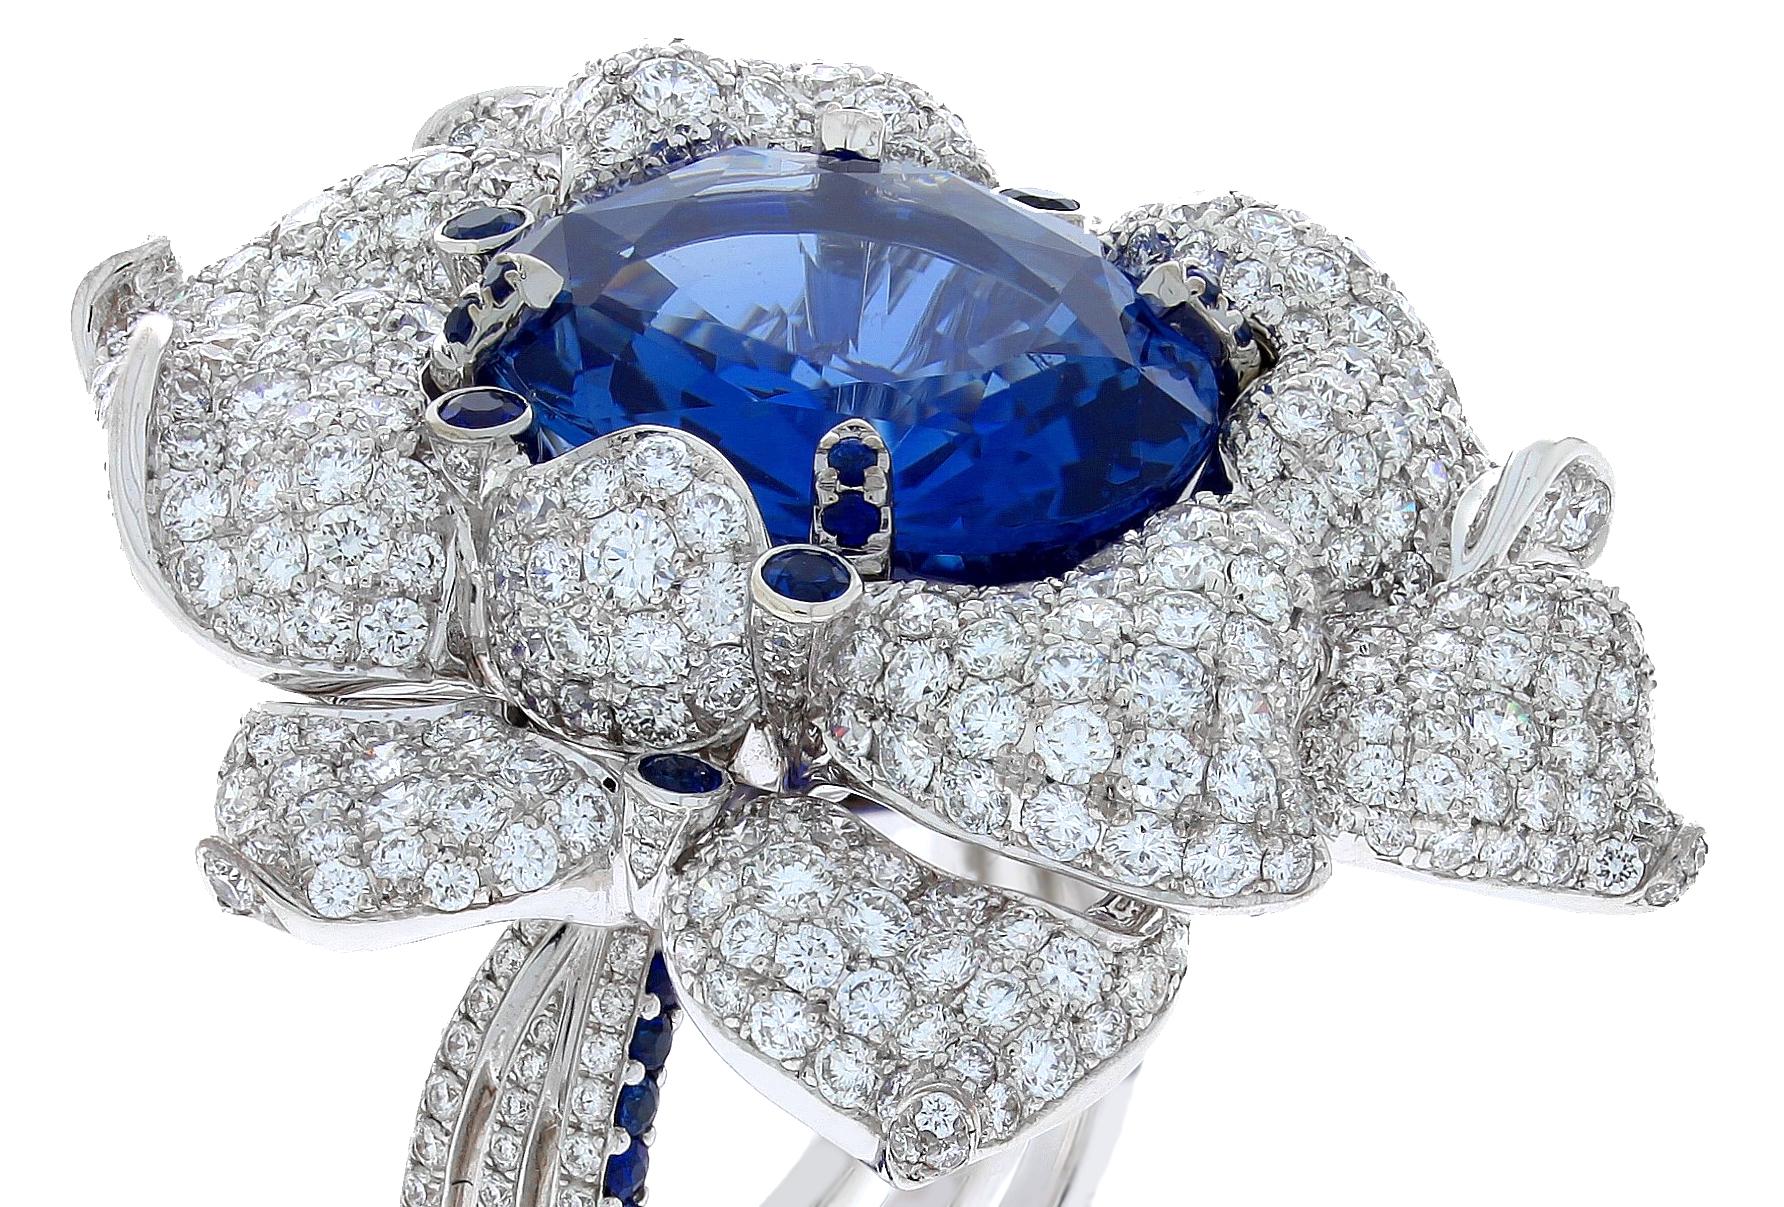 This mesmerizing 18 carat white gold transparent blue oval sapphire and diamond ring by Chatila features 49 smaller sapphires spread out on a bed of white diamonds on the petals. The band is also decorated with three rows of diamonds and a front row